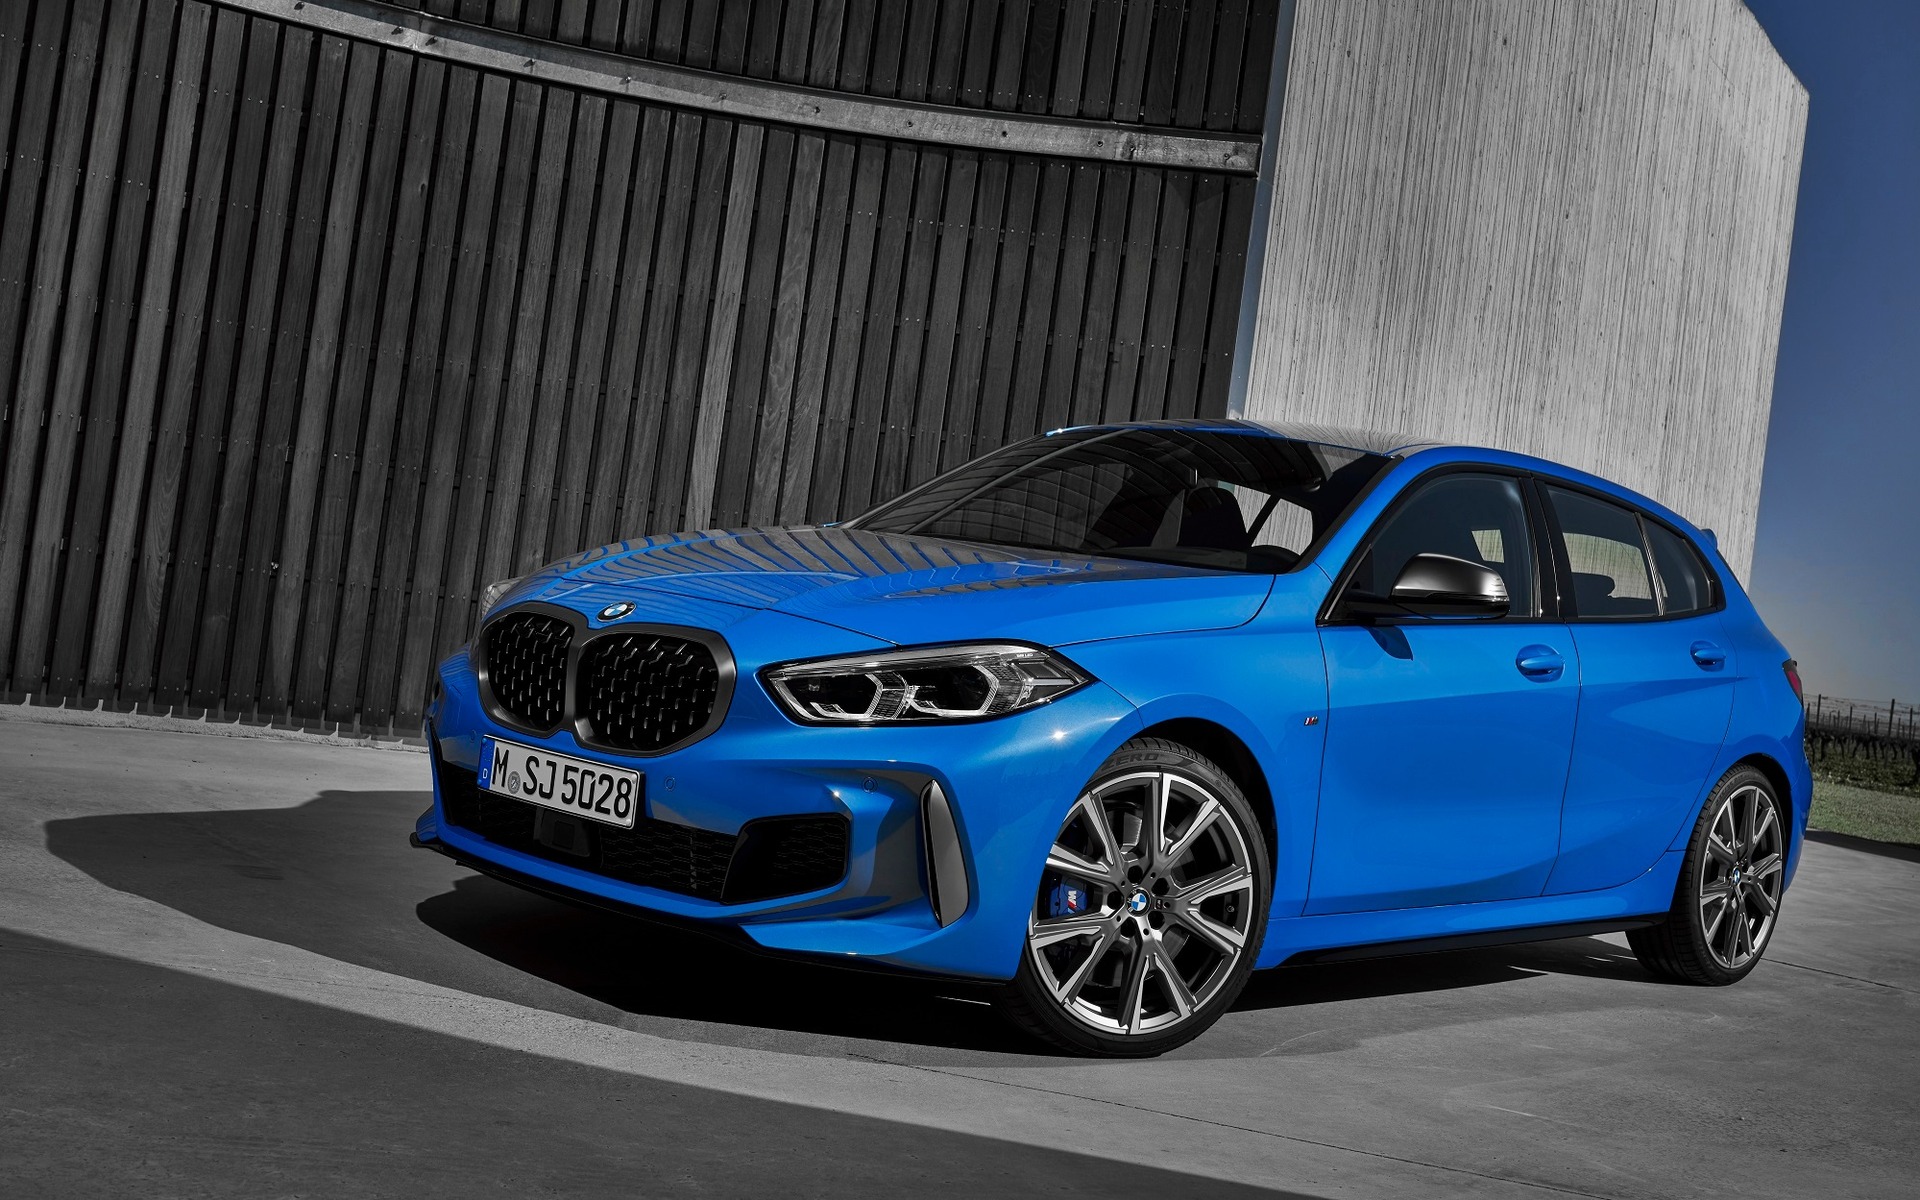 BMW 1 Series - Compact Sporty Hatchback Cars & Models